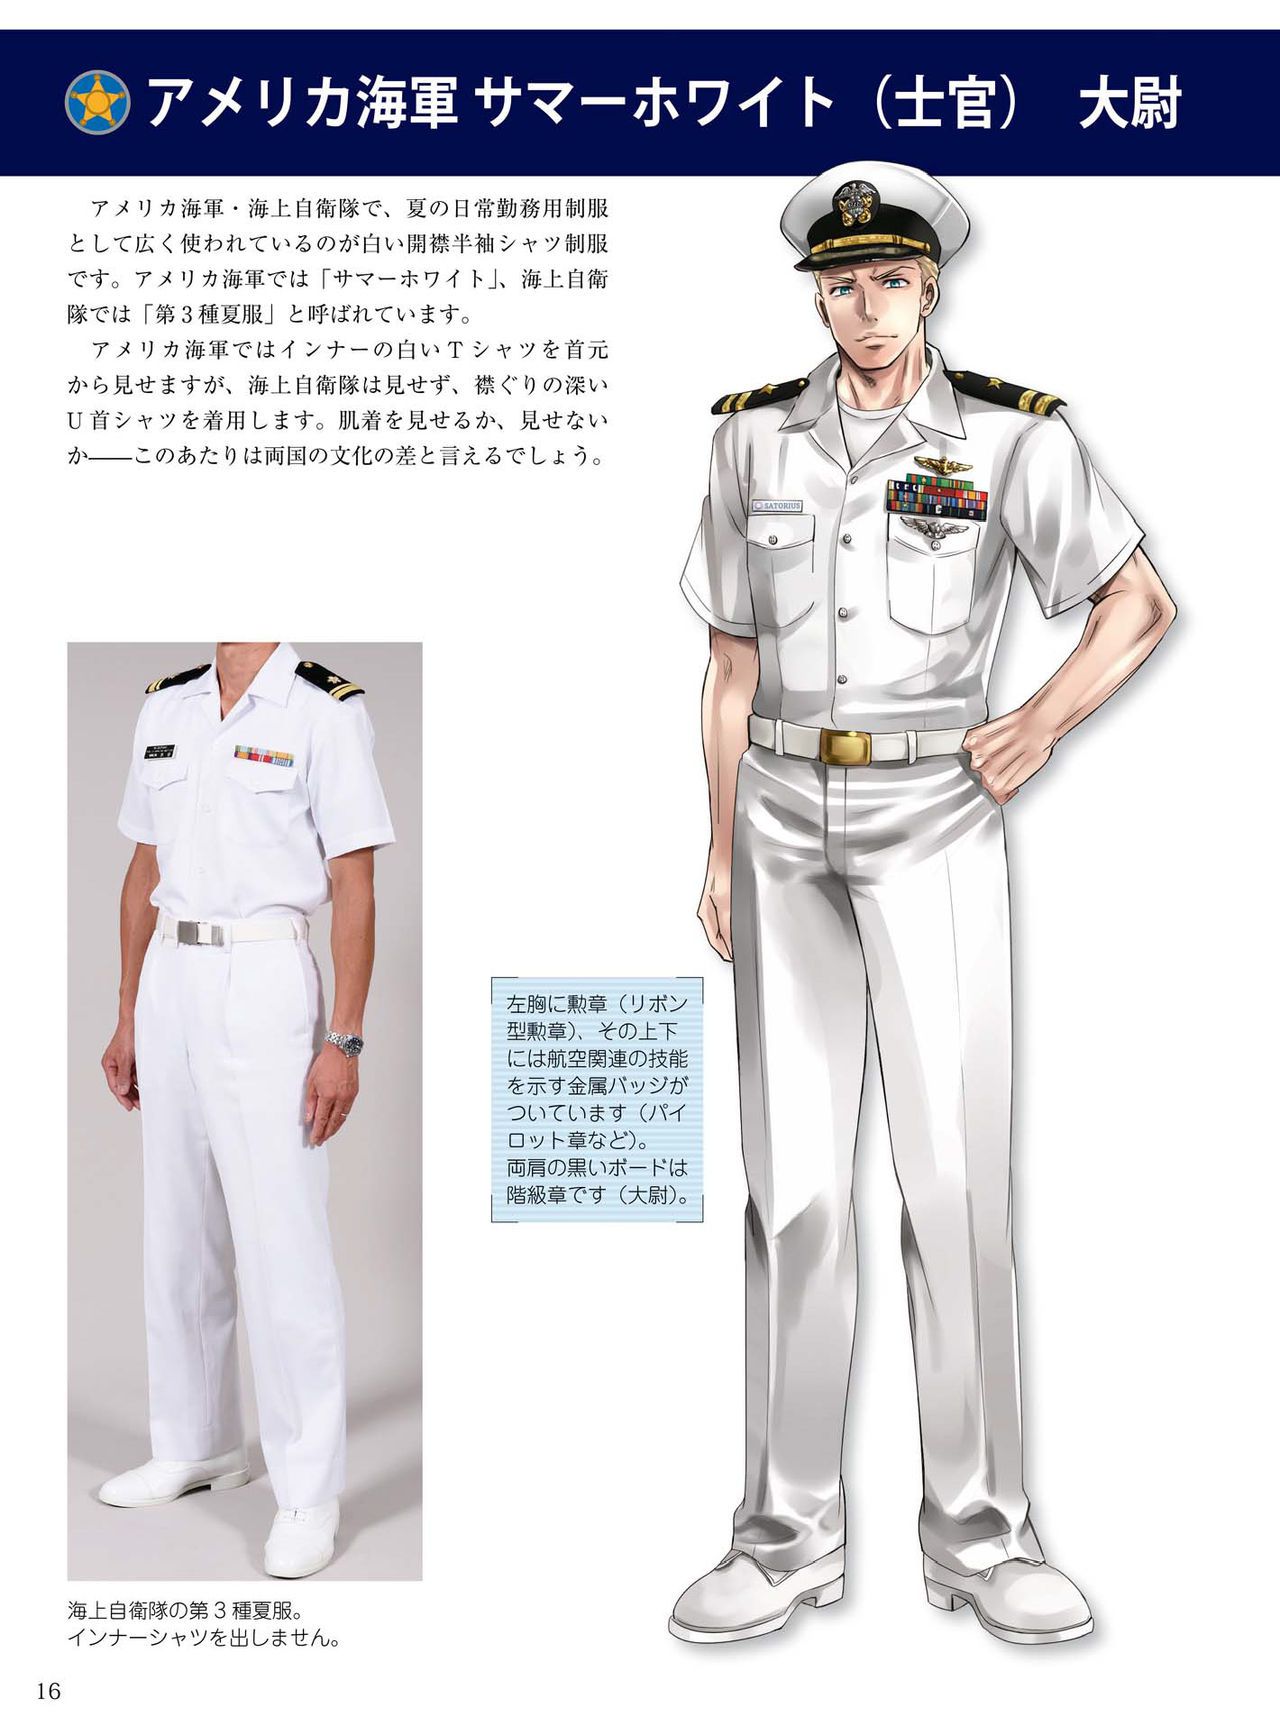 How to draw military uniforms and uniforms From Self-Defense Forces 軍服・制服の描き方 アメリカ軍・自衛隊の制服から戦闘服まで 19